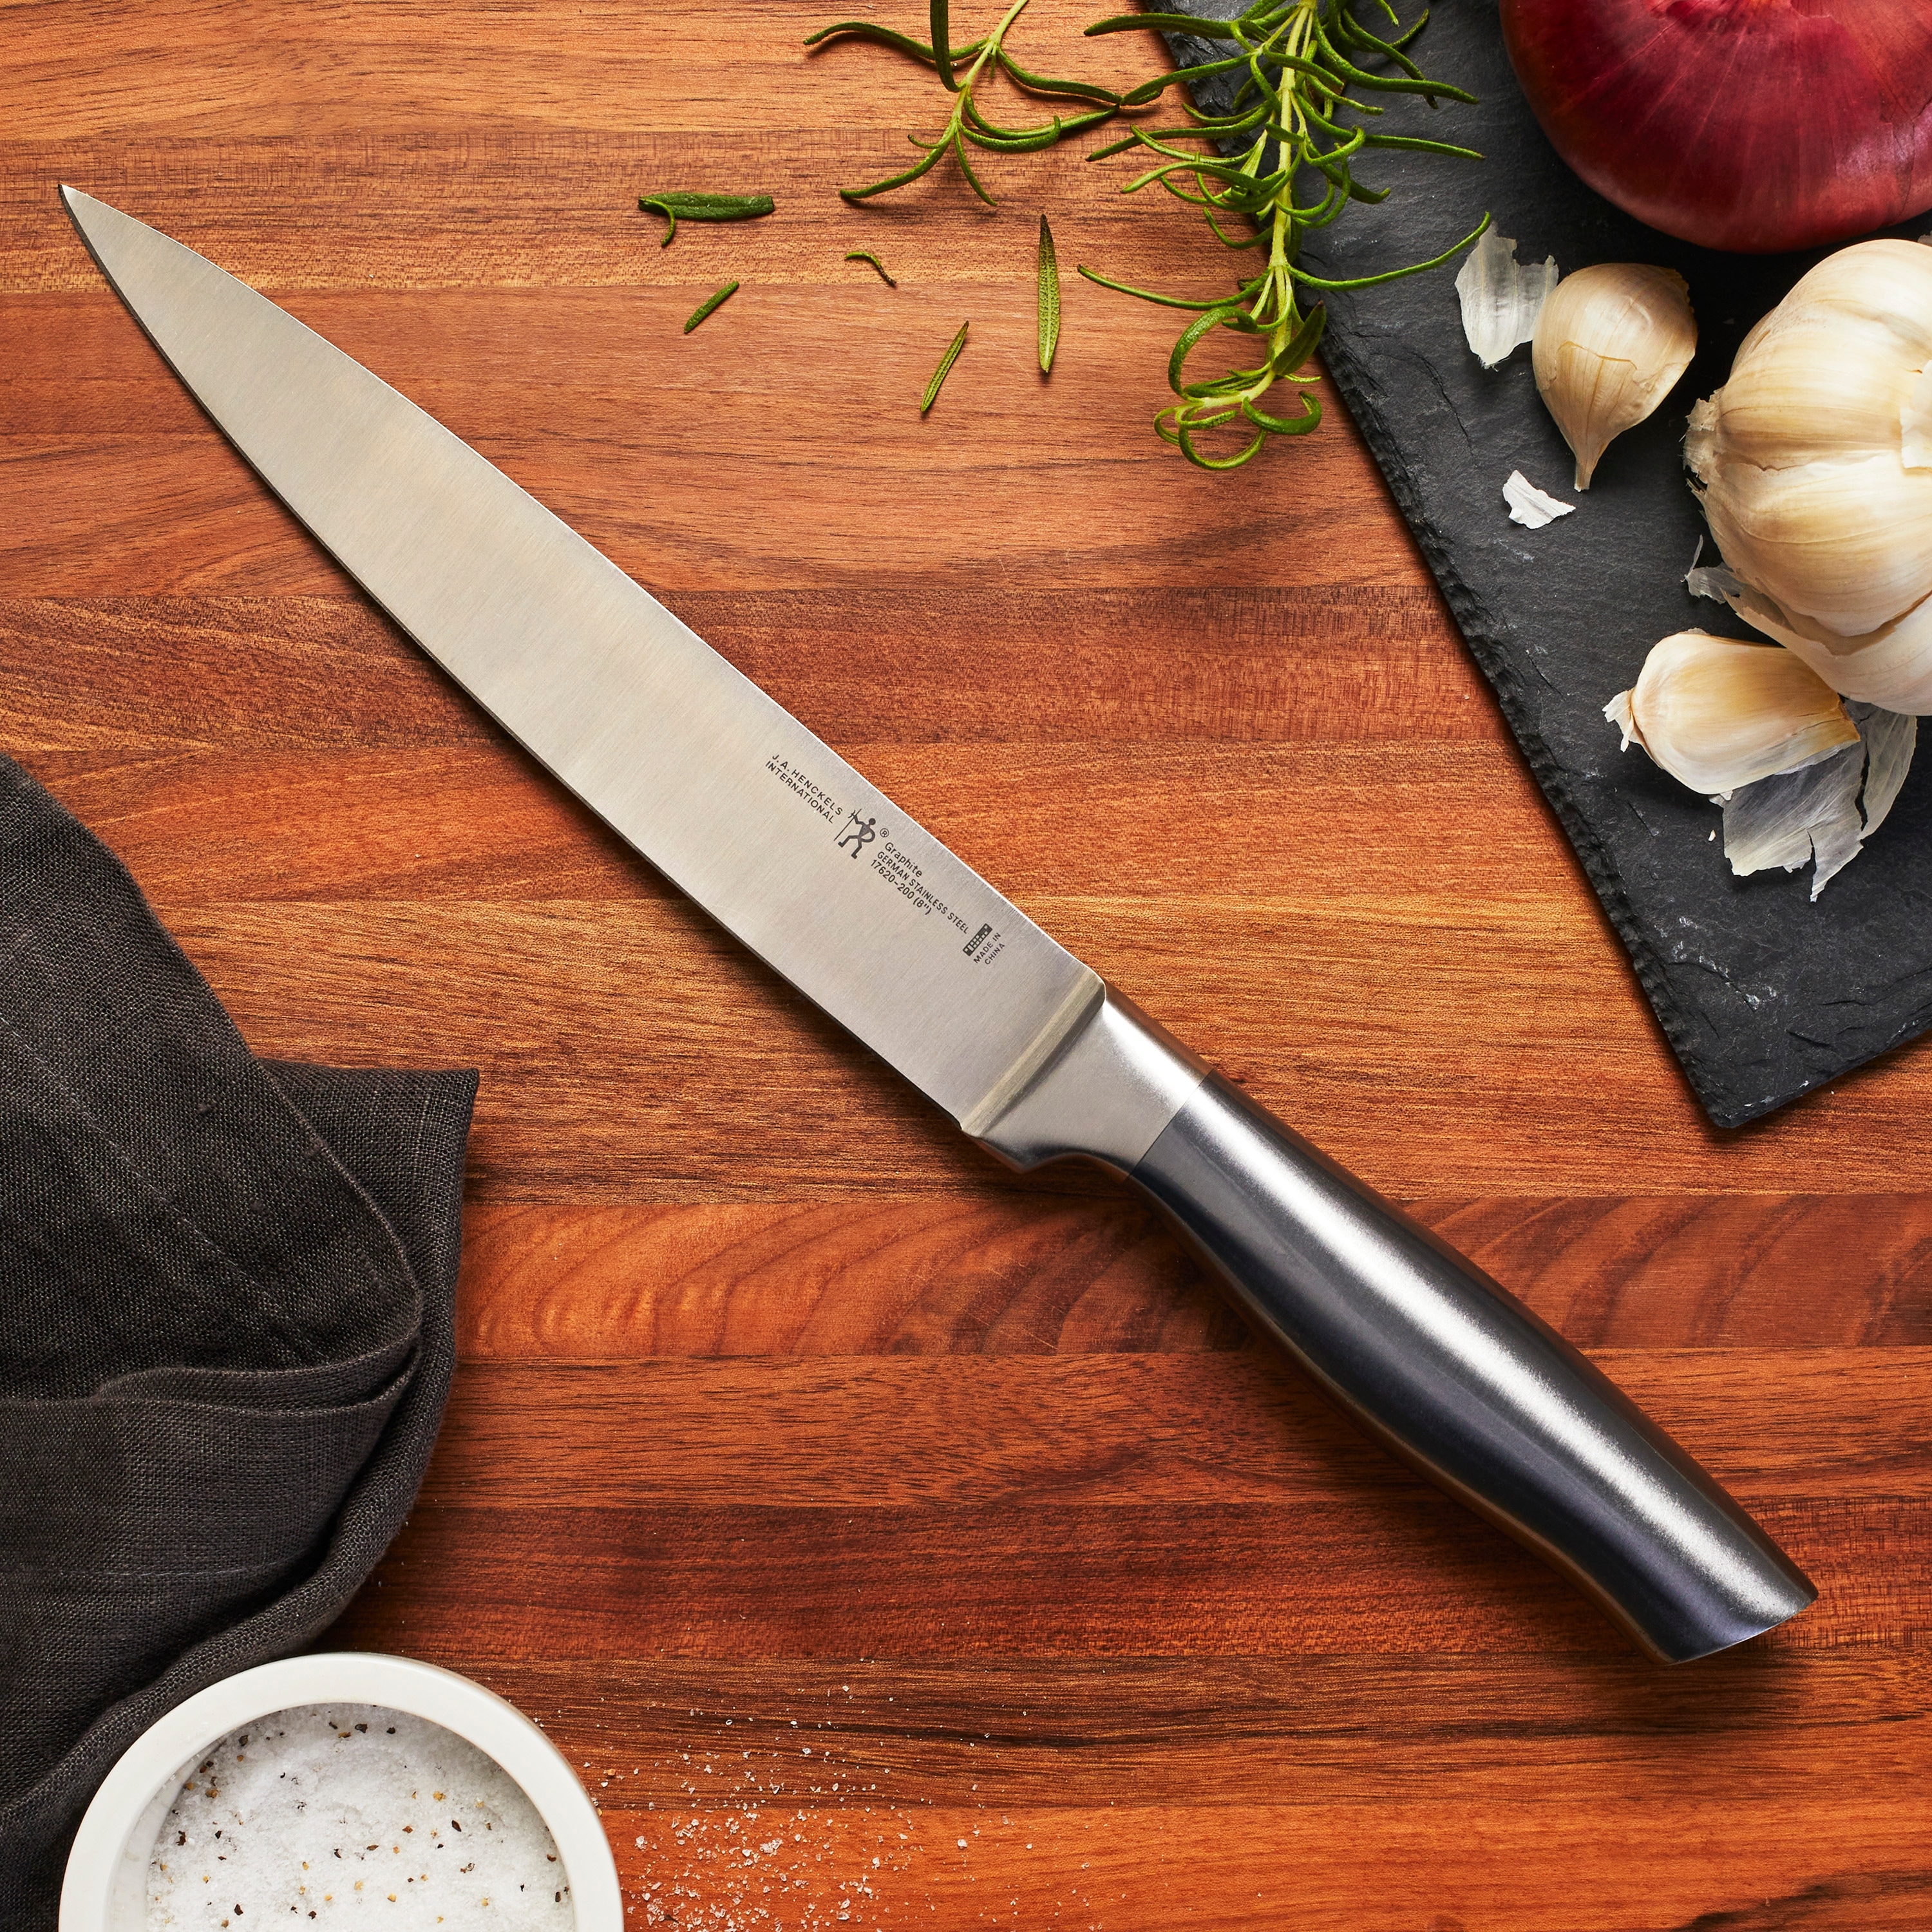 https://ak1.ostkcdn.com/images/products/is/images/direct/bc905e236b9015d13b29bfe981be03cb8d1986fb/Henckels-Graphite-8-inch-Carving-Knife.jpg